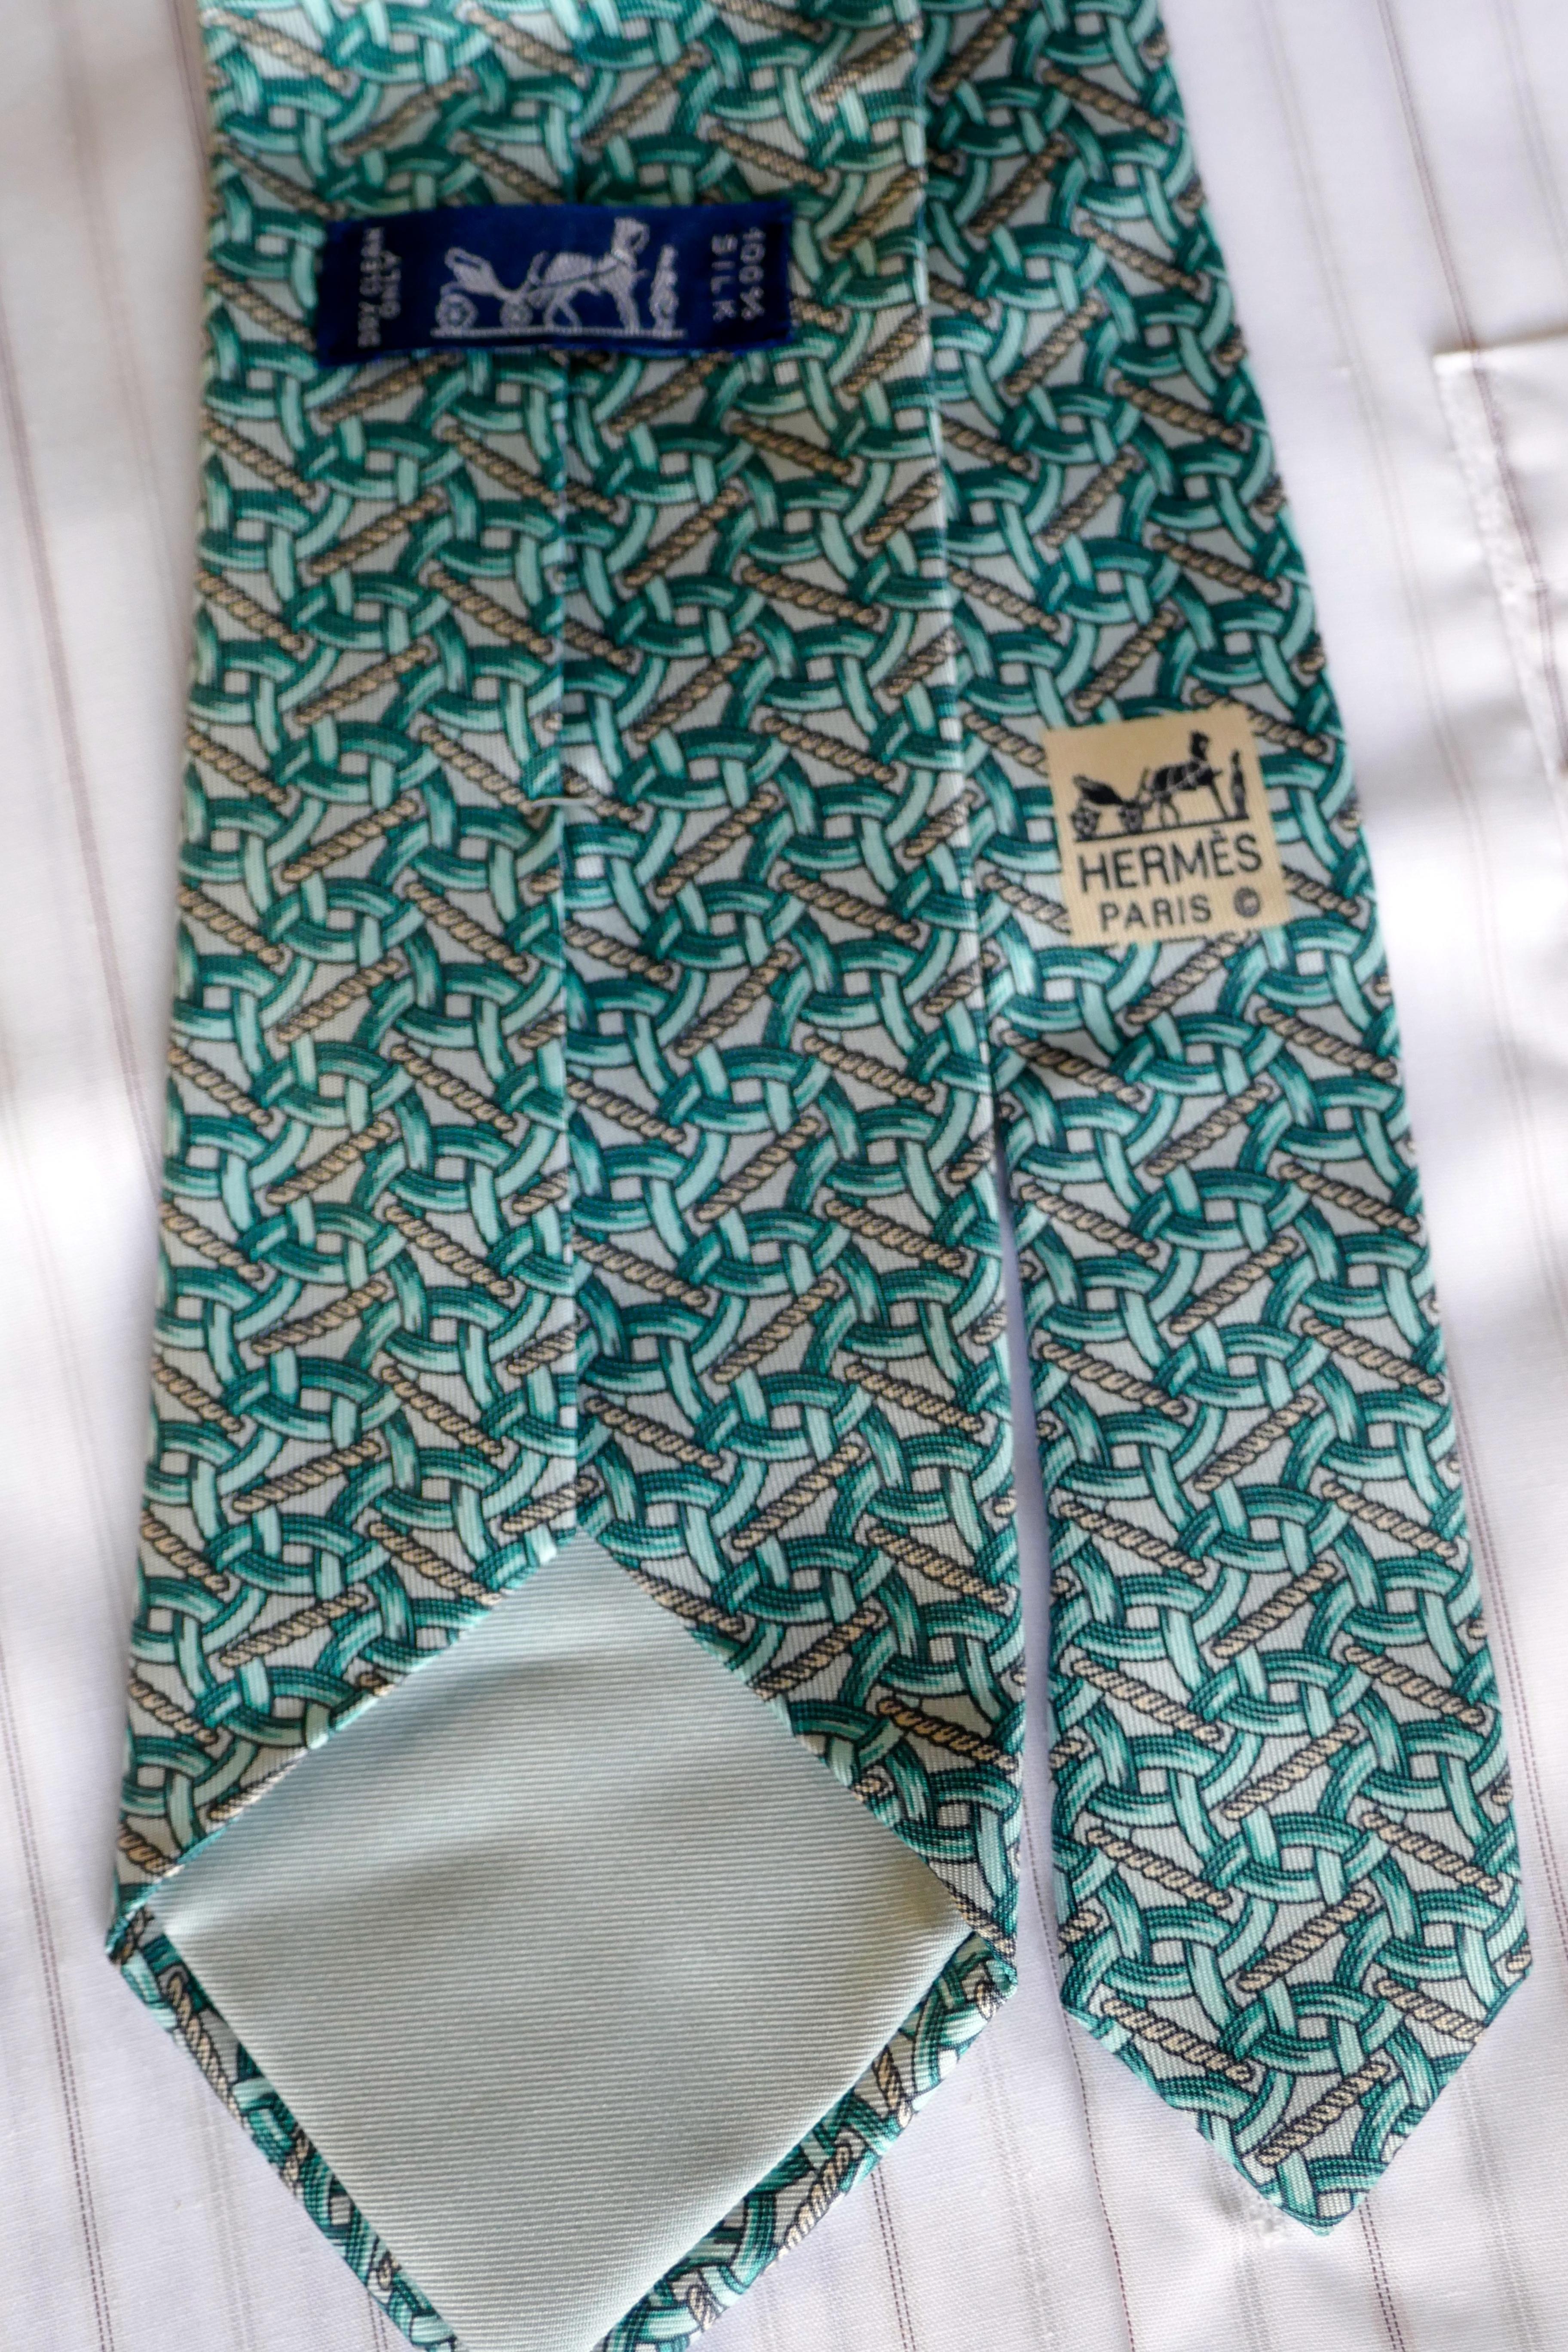 Rare Hermes Silk Tie, All Over Link Pattern, Aqua On Silver/Grey

Classic Hermes All Over Chain Design
Very Rare Colour-way Aqua on Silver Grey
A Very Special tie, instantly recognisable as Hermes by this e in the know
100% silk 
Silk Lined in